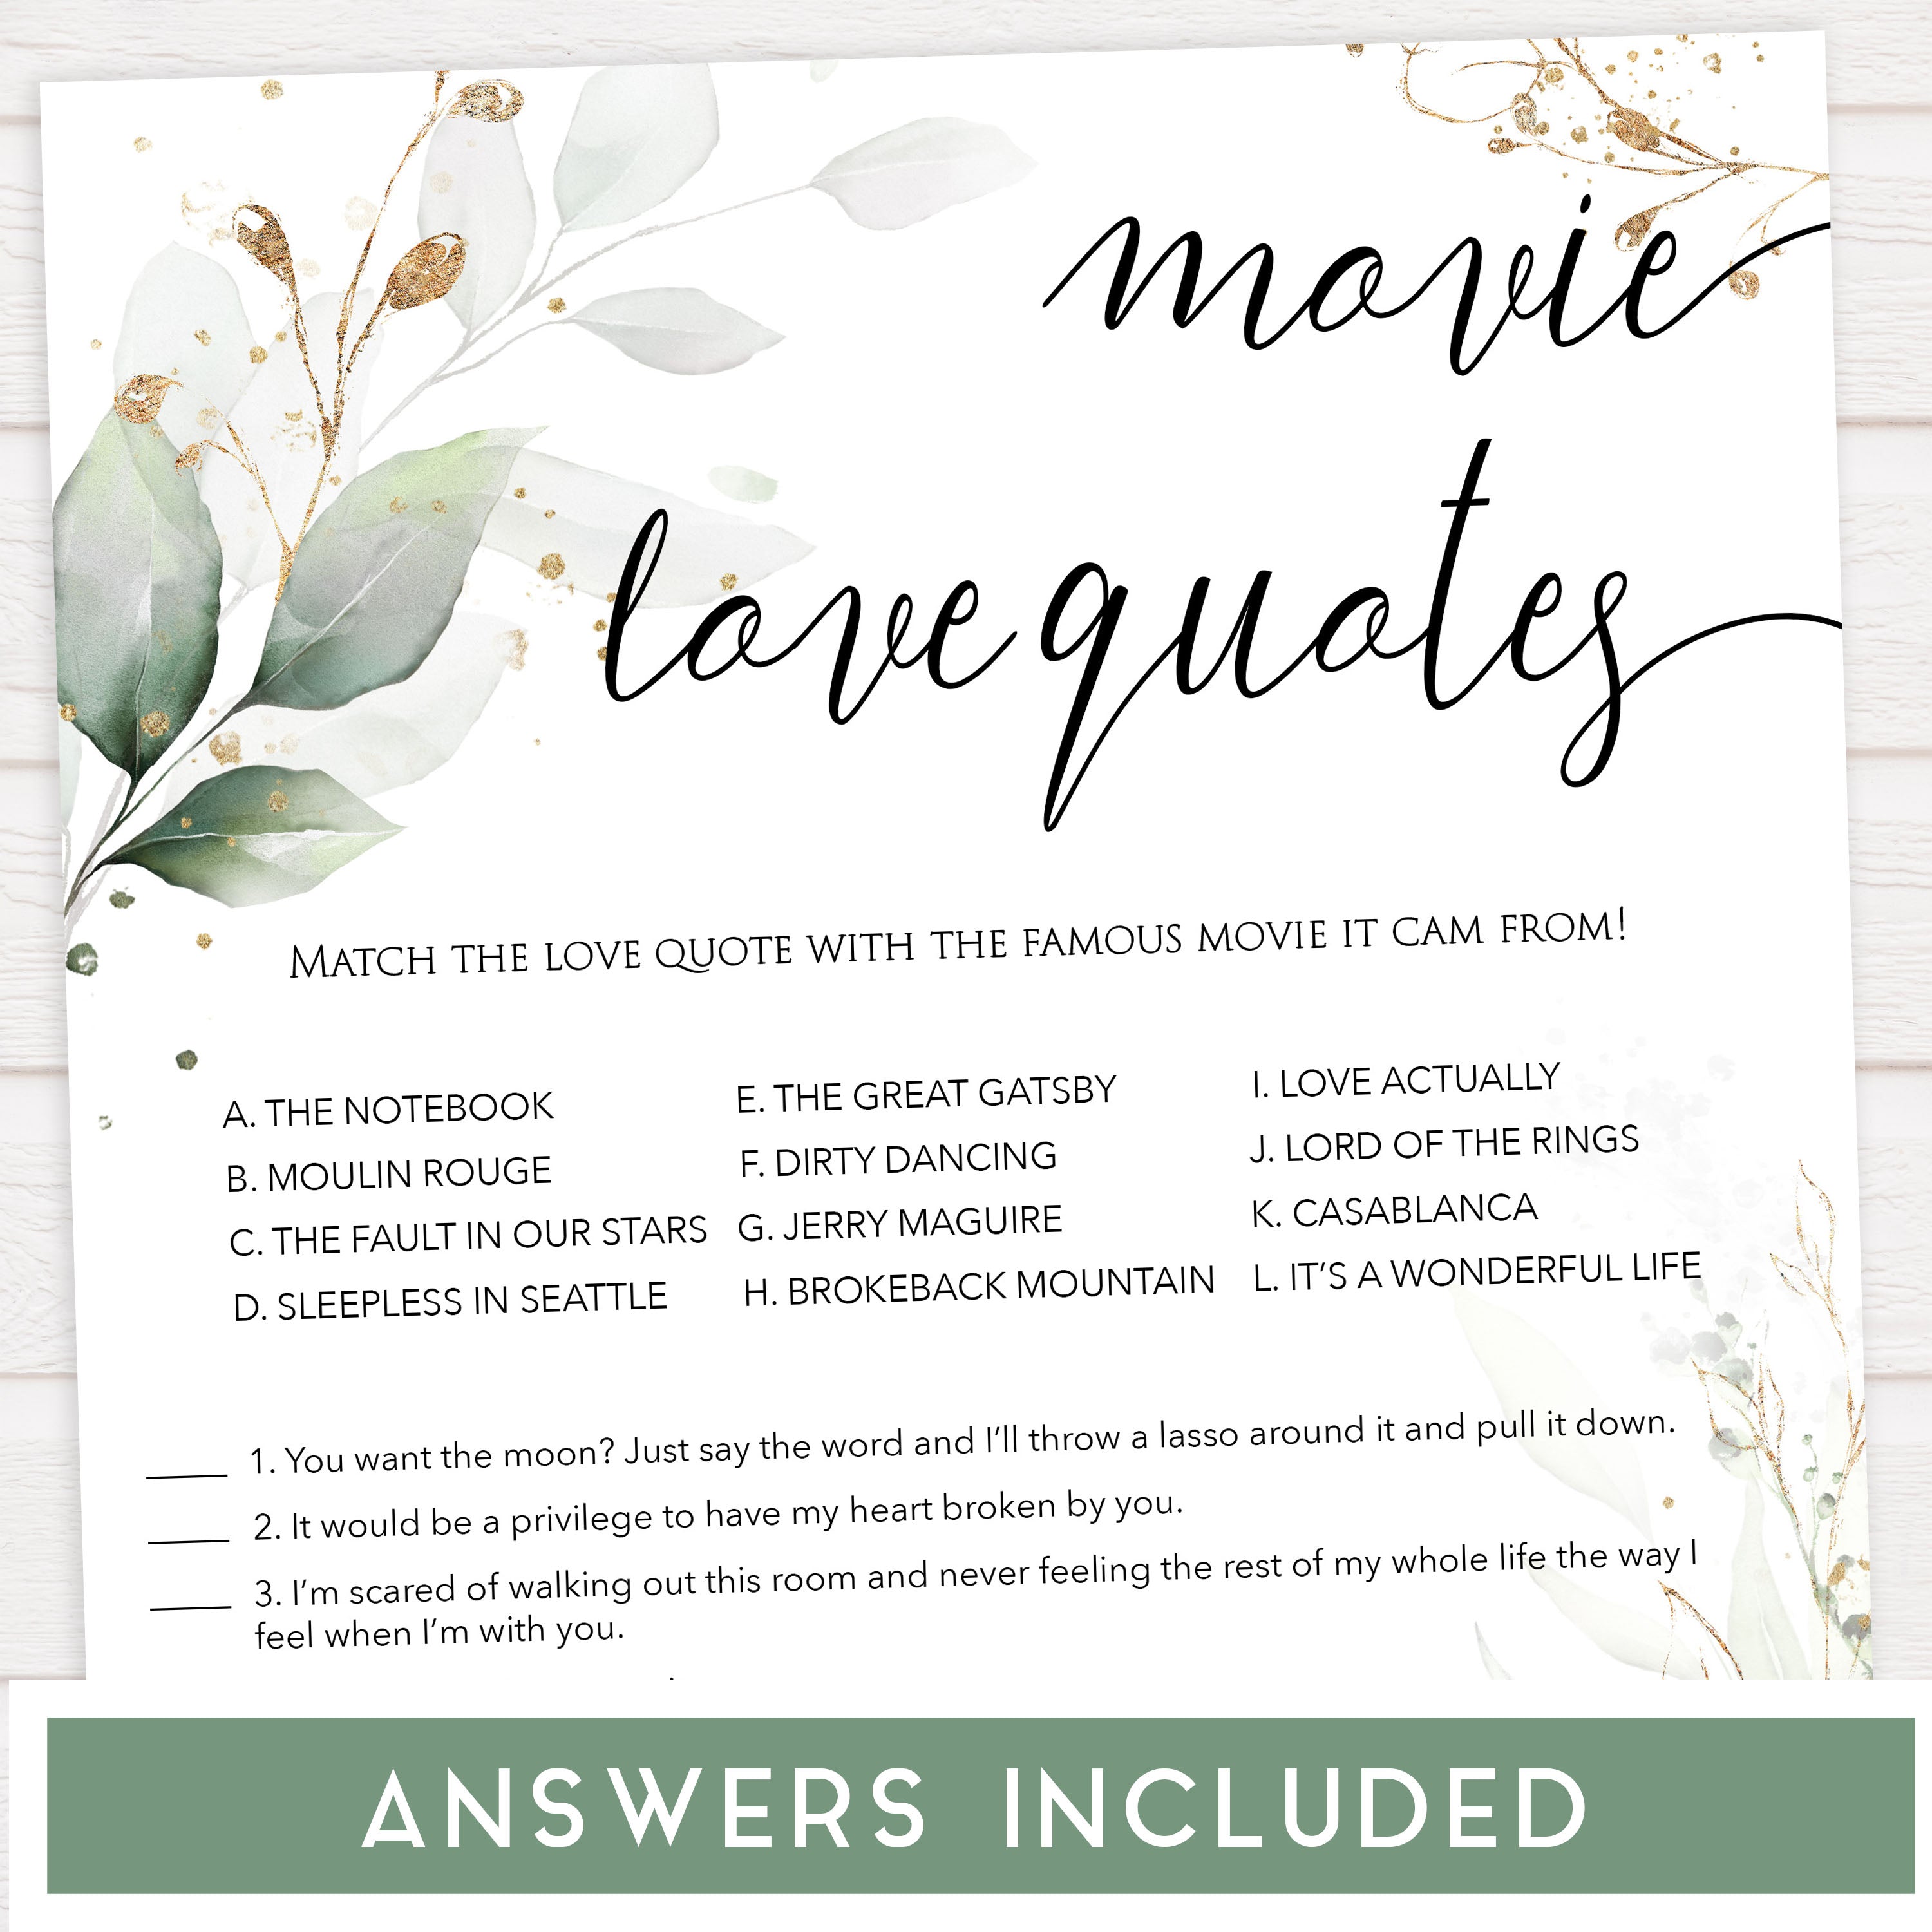 match the movie love quite game, Printable bridal shower games, greenery bridal shower, gold leaf bridal shower games, fun bridal shower games, bridal shower game ideas, greenery bridal shower